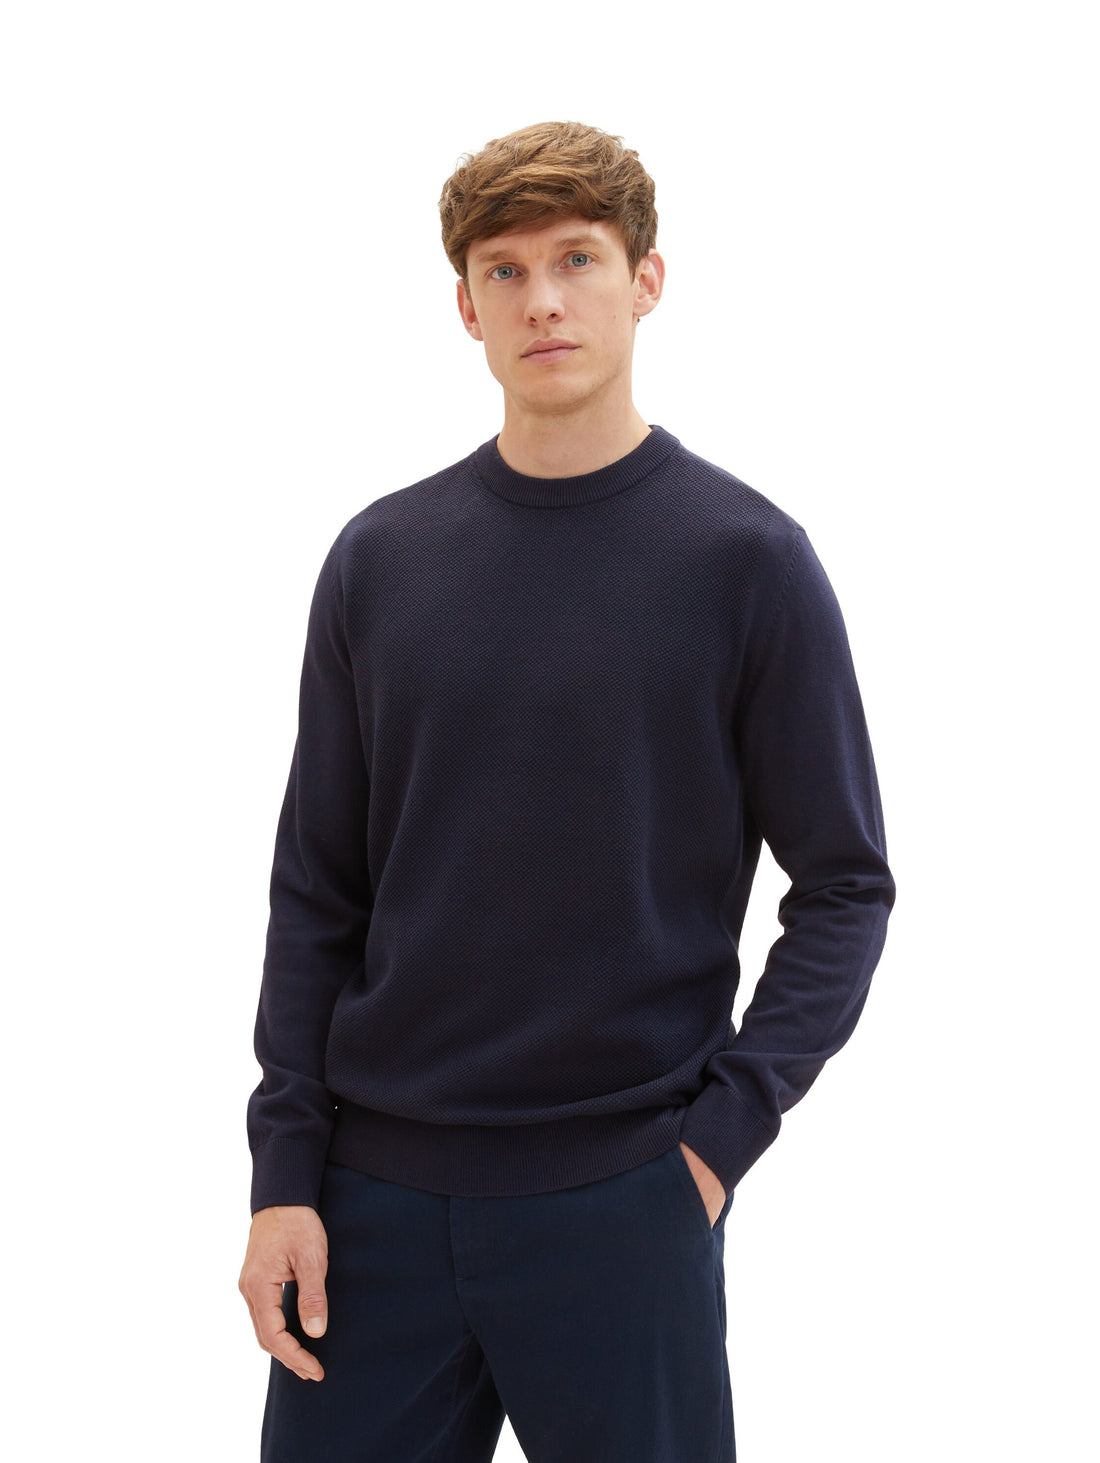 Knitted Pullover With Round Neckline_1038198_10668_06